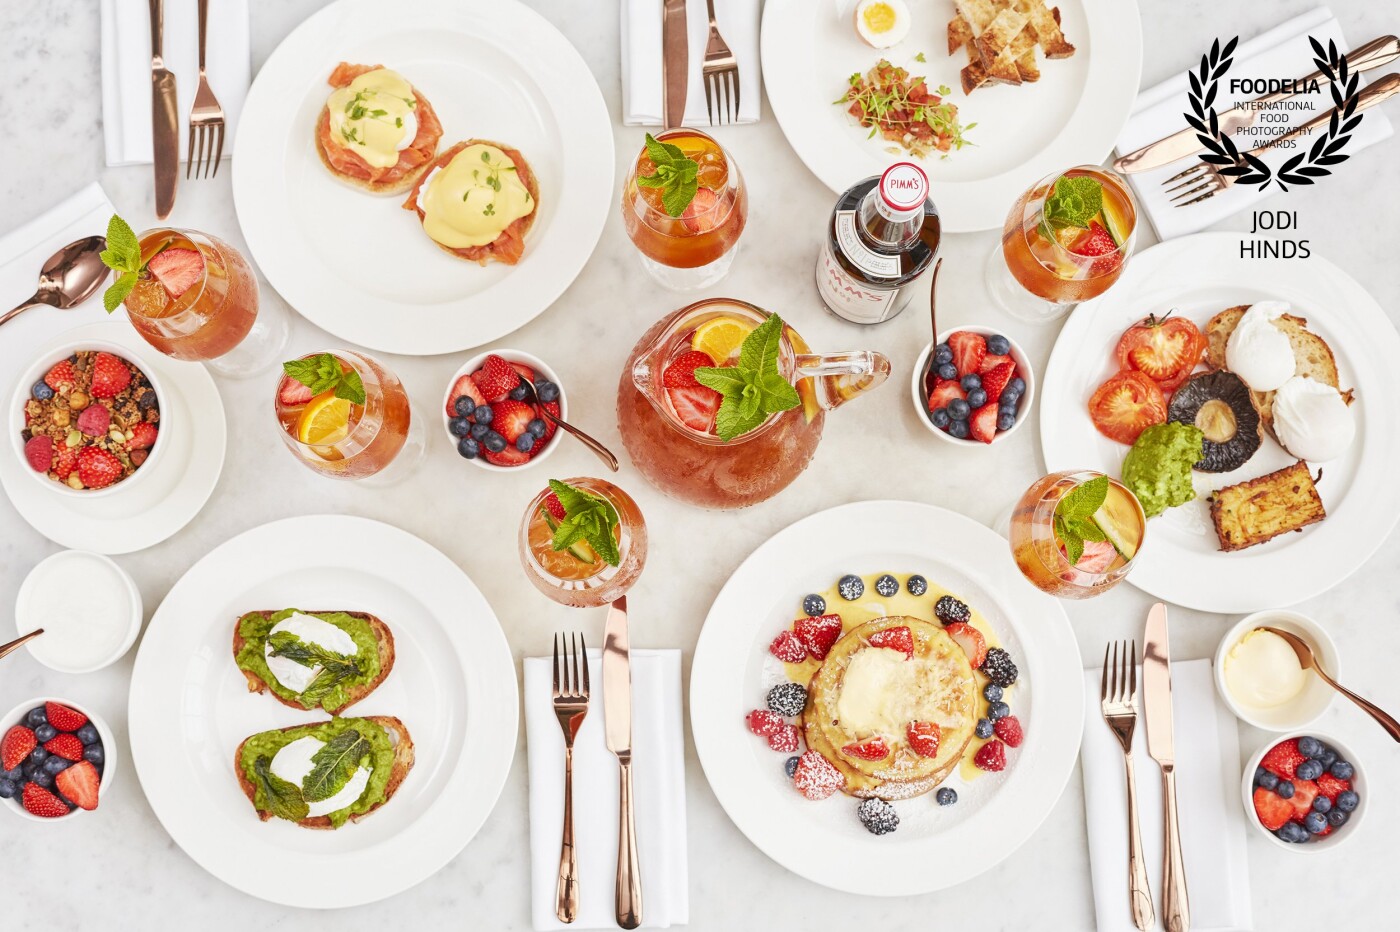 Nothing quite says summer like Pimms and this shoot oozed summer. The full breakfast sharing platter of all the best brunch dishes.<br />
<br />
Fabulously commissioned by @thisismission  for @PimmsGB<br />
Beautifully retouched by @theforgeuk<br />
Photographer: @jodihindsphoto<br />
